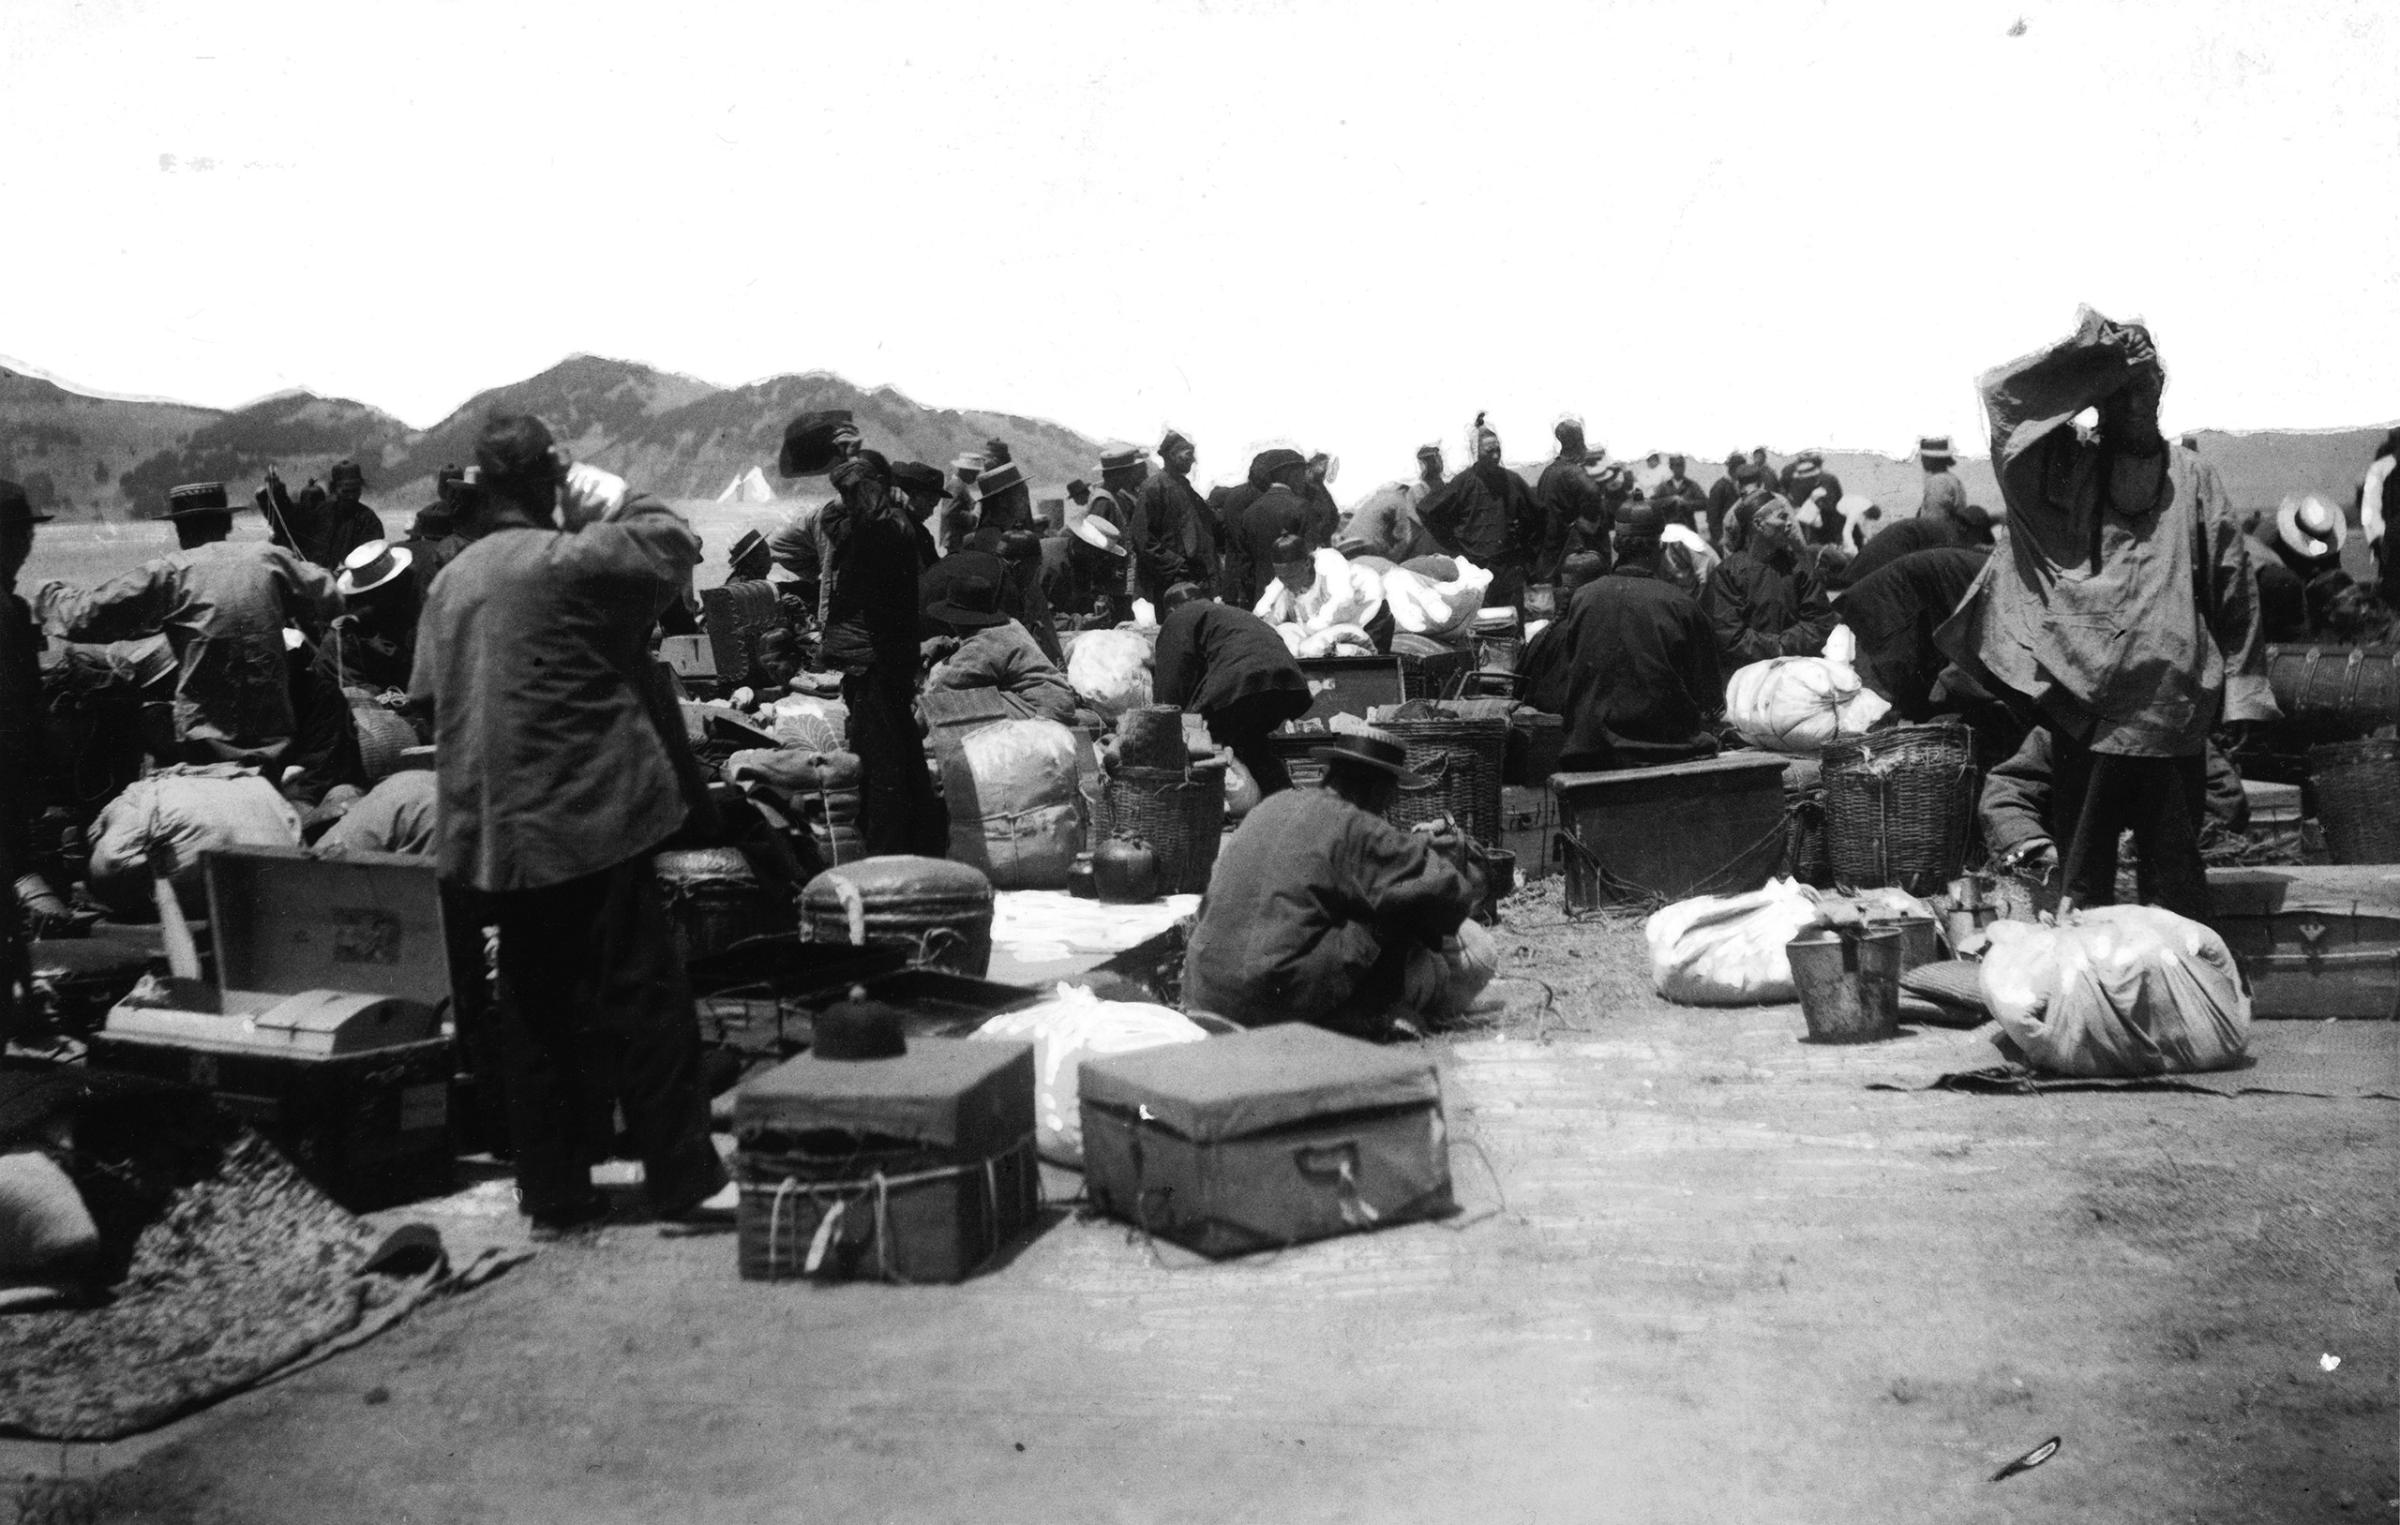 A group of Chinese and East Asian immigrants wait on a wharf after disinfection at Angel Island, San Francisco Bay, California, ca. 1910s.